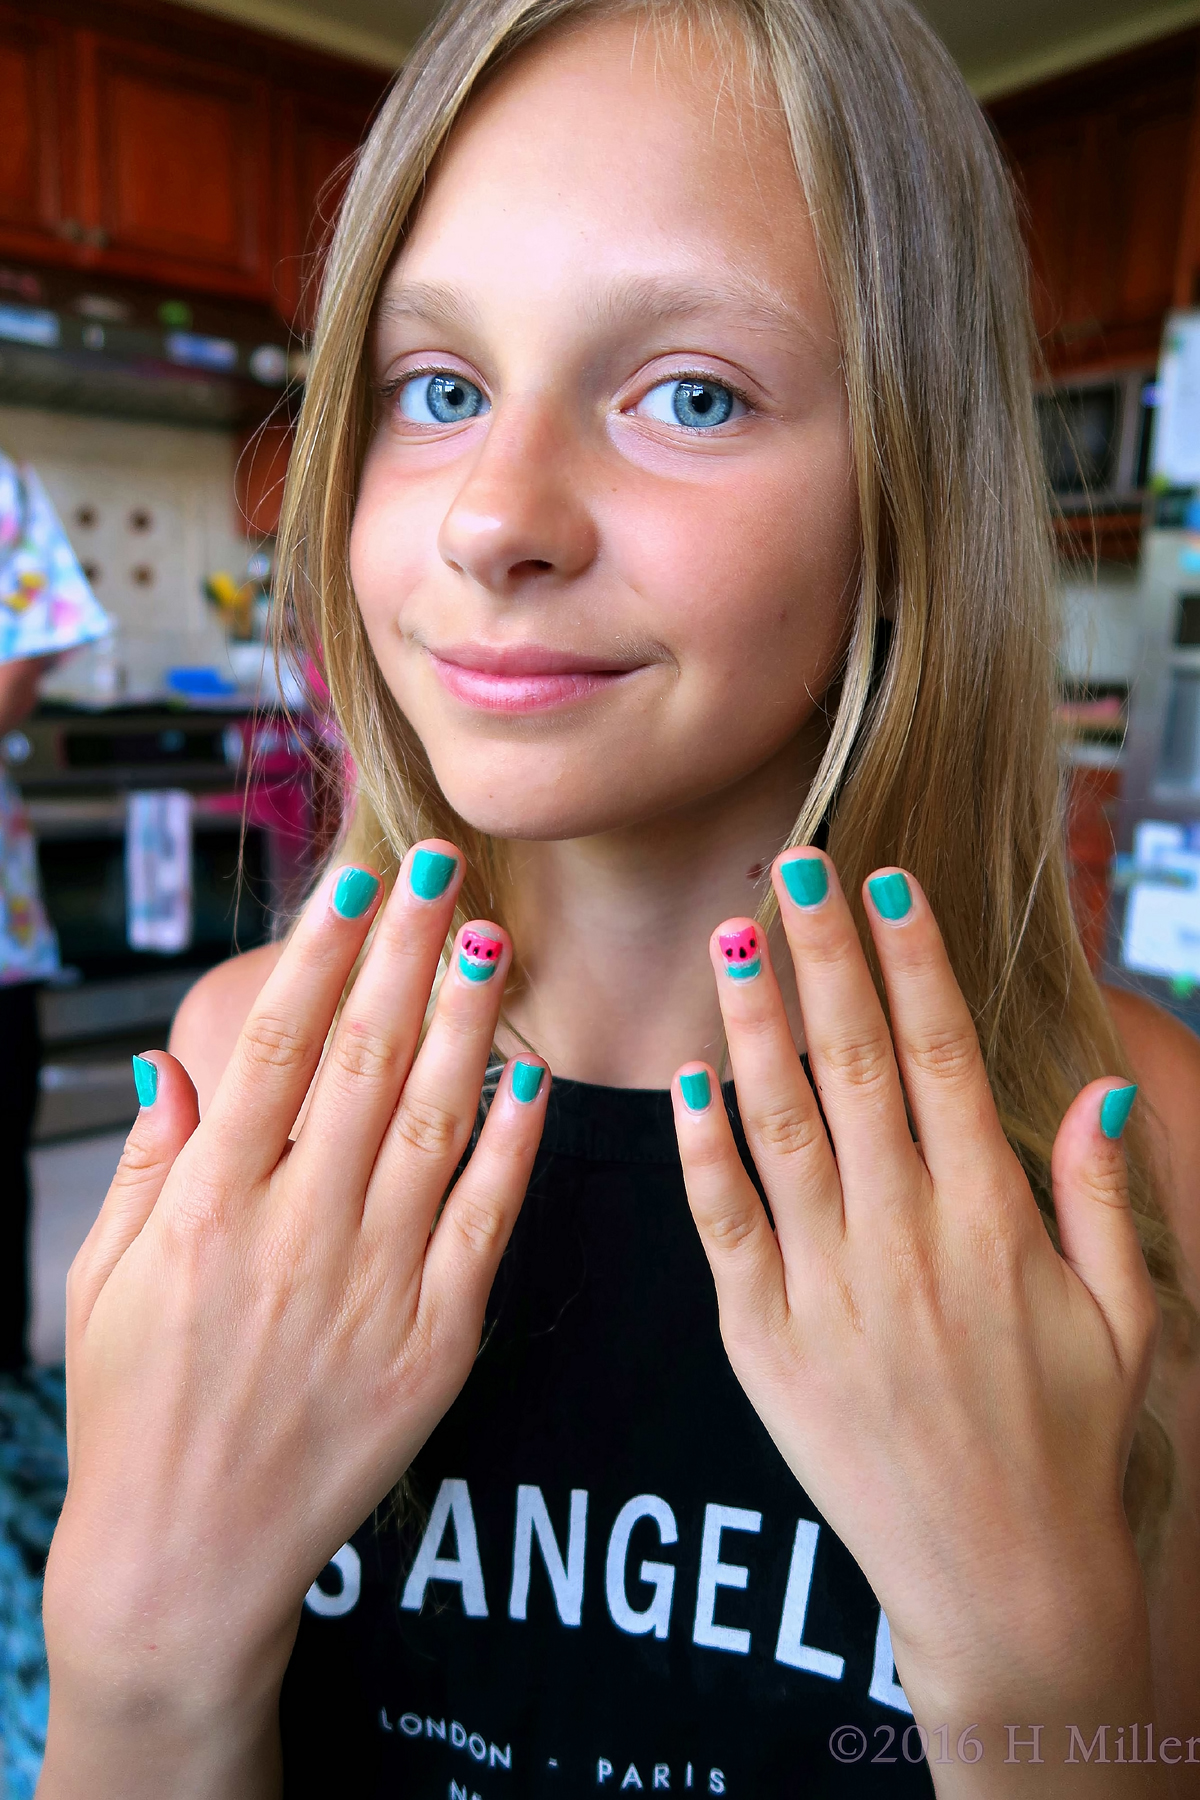 She Loves Her Adorable Watermelon Home Manicure. 